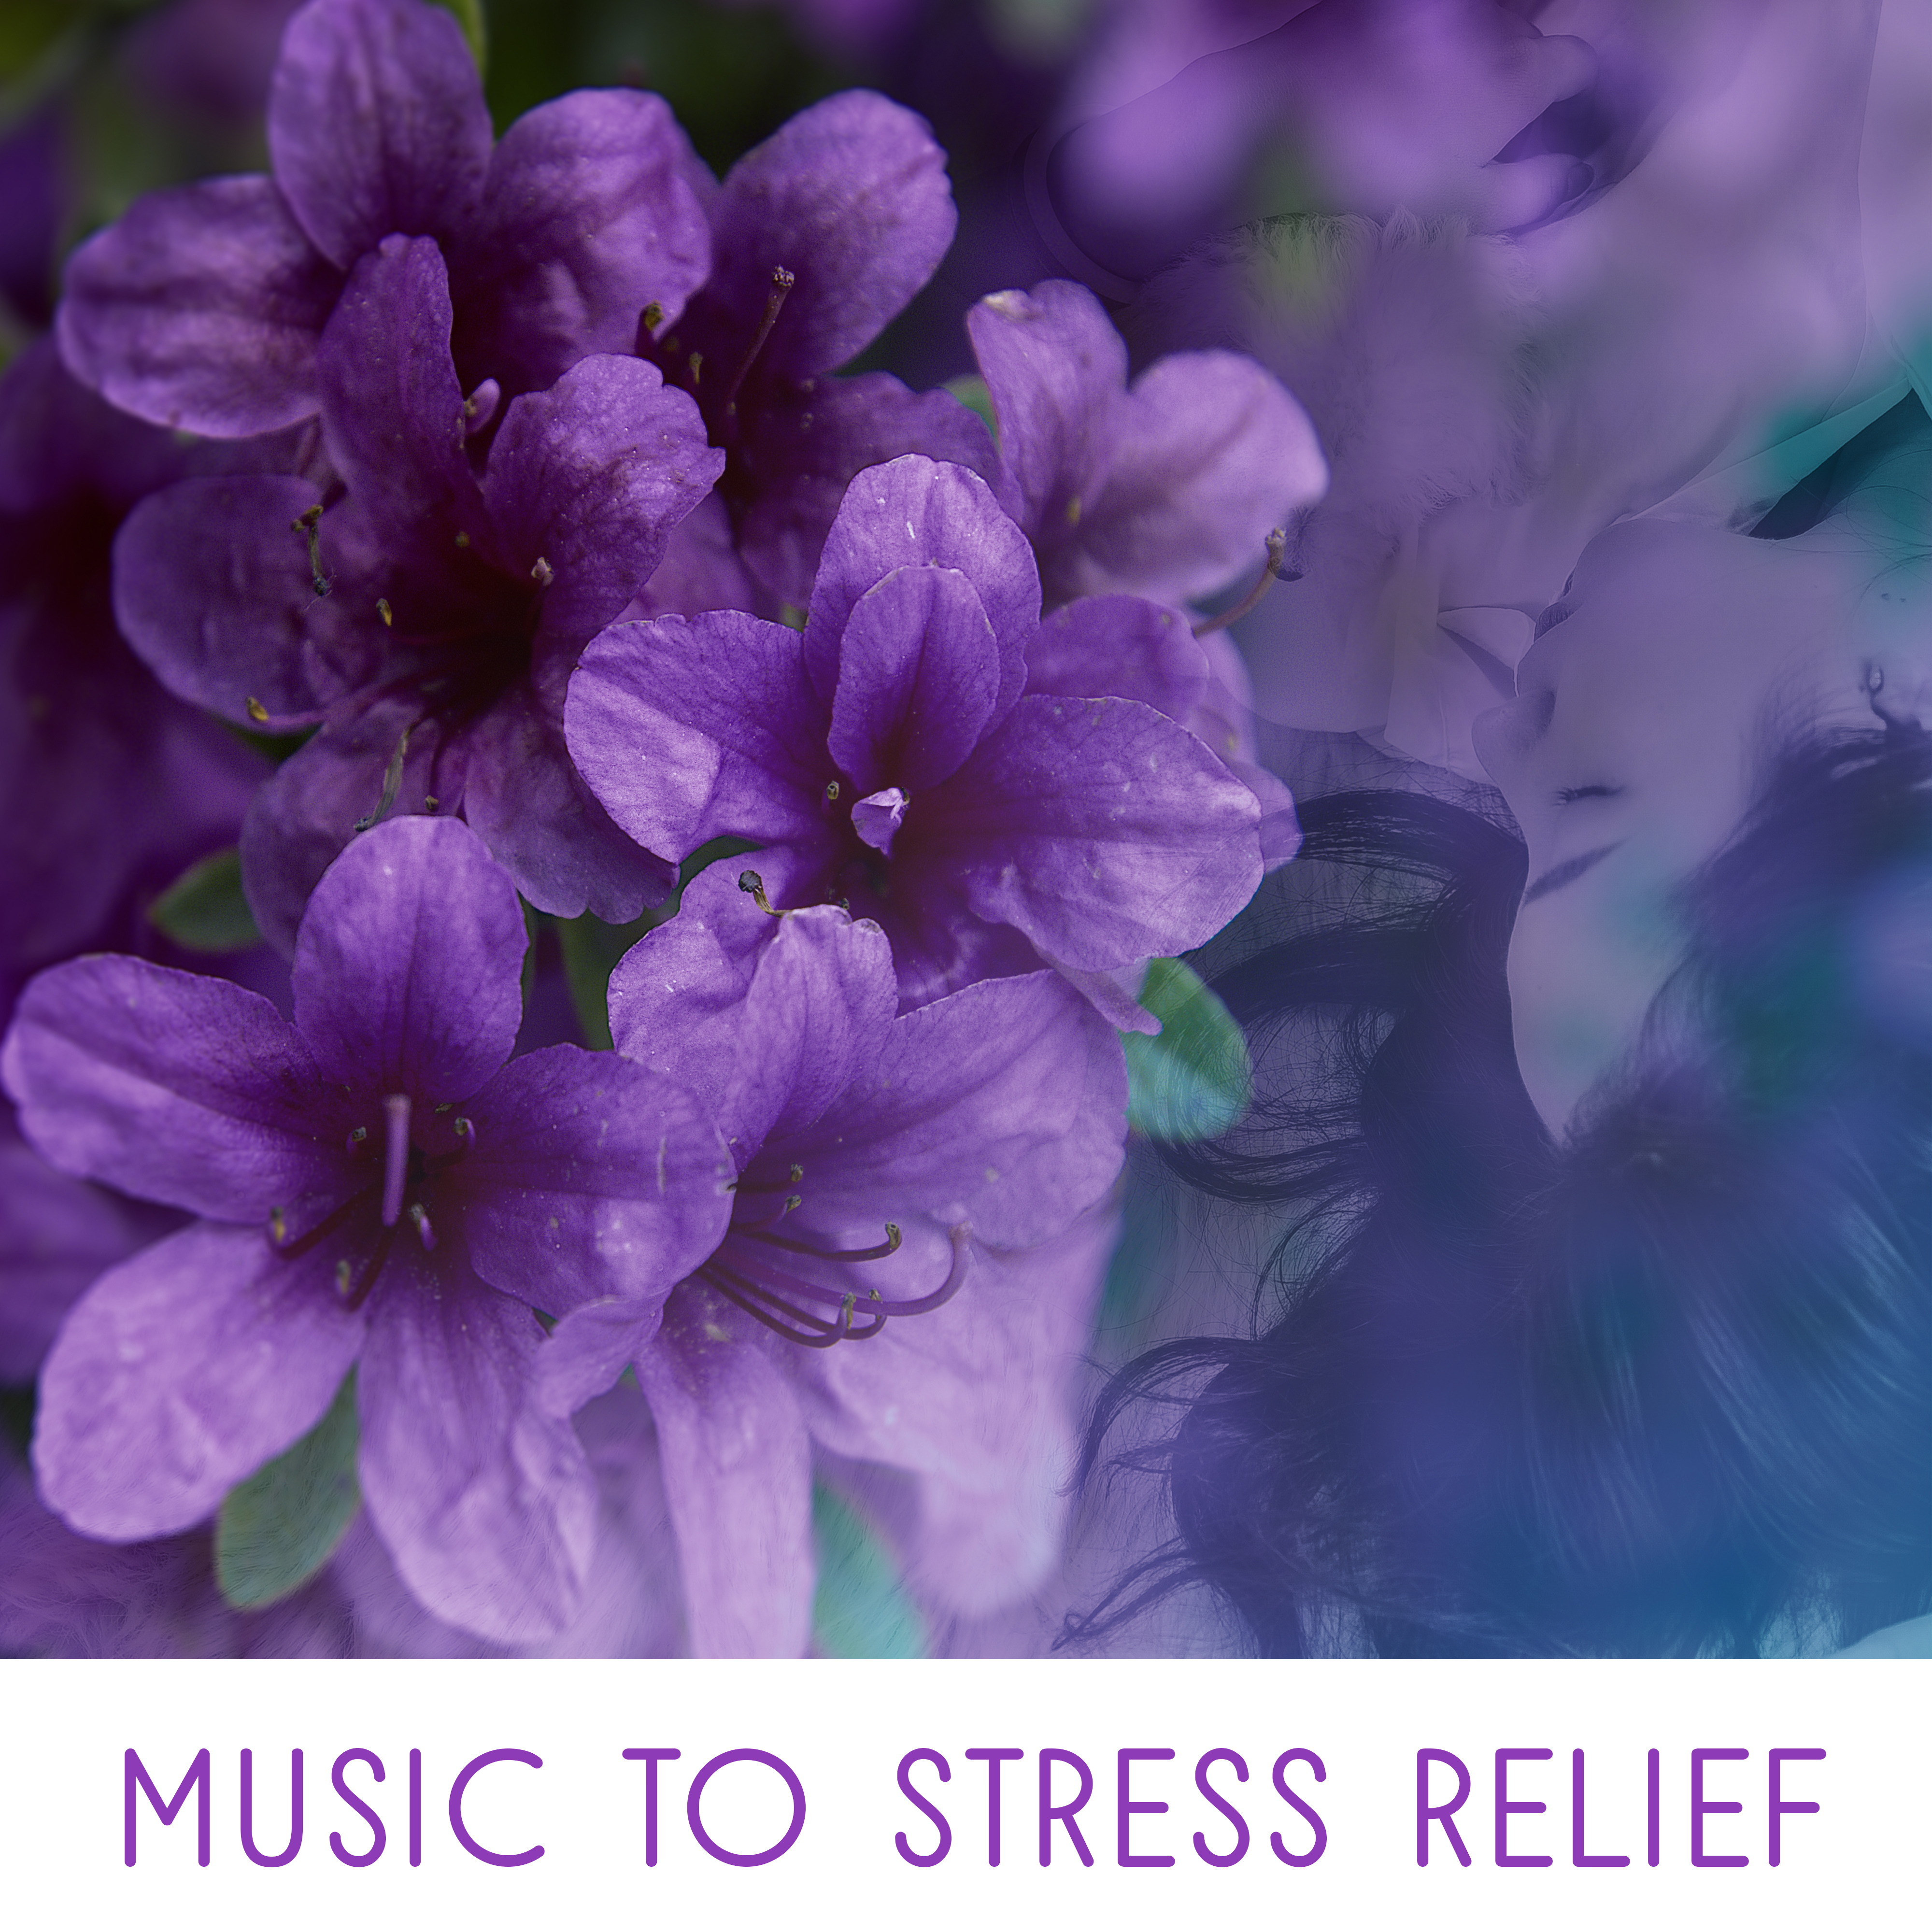 Music to Stress Relief  Inner Peace, Stress Free, Calming Waves, New Age Peaceful Sounds